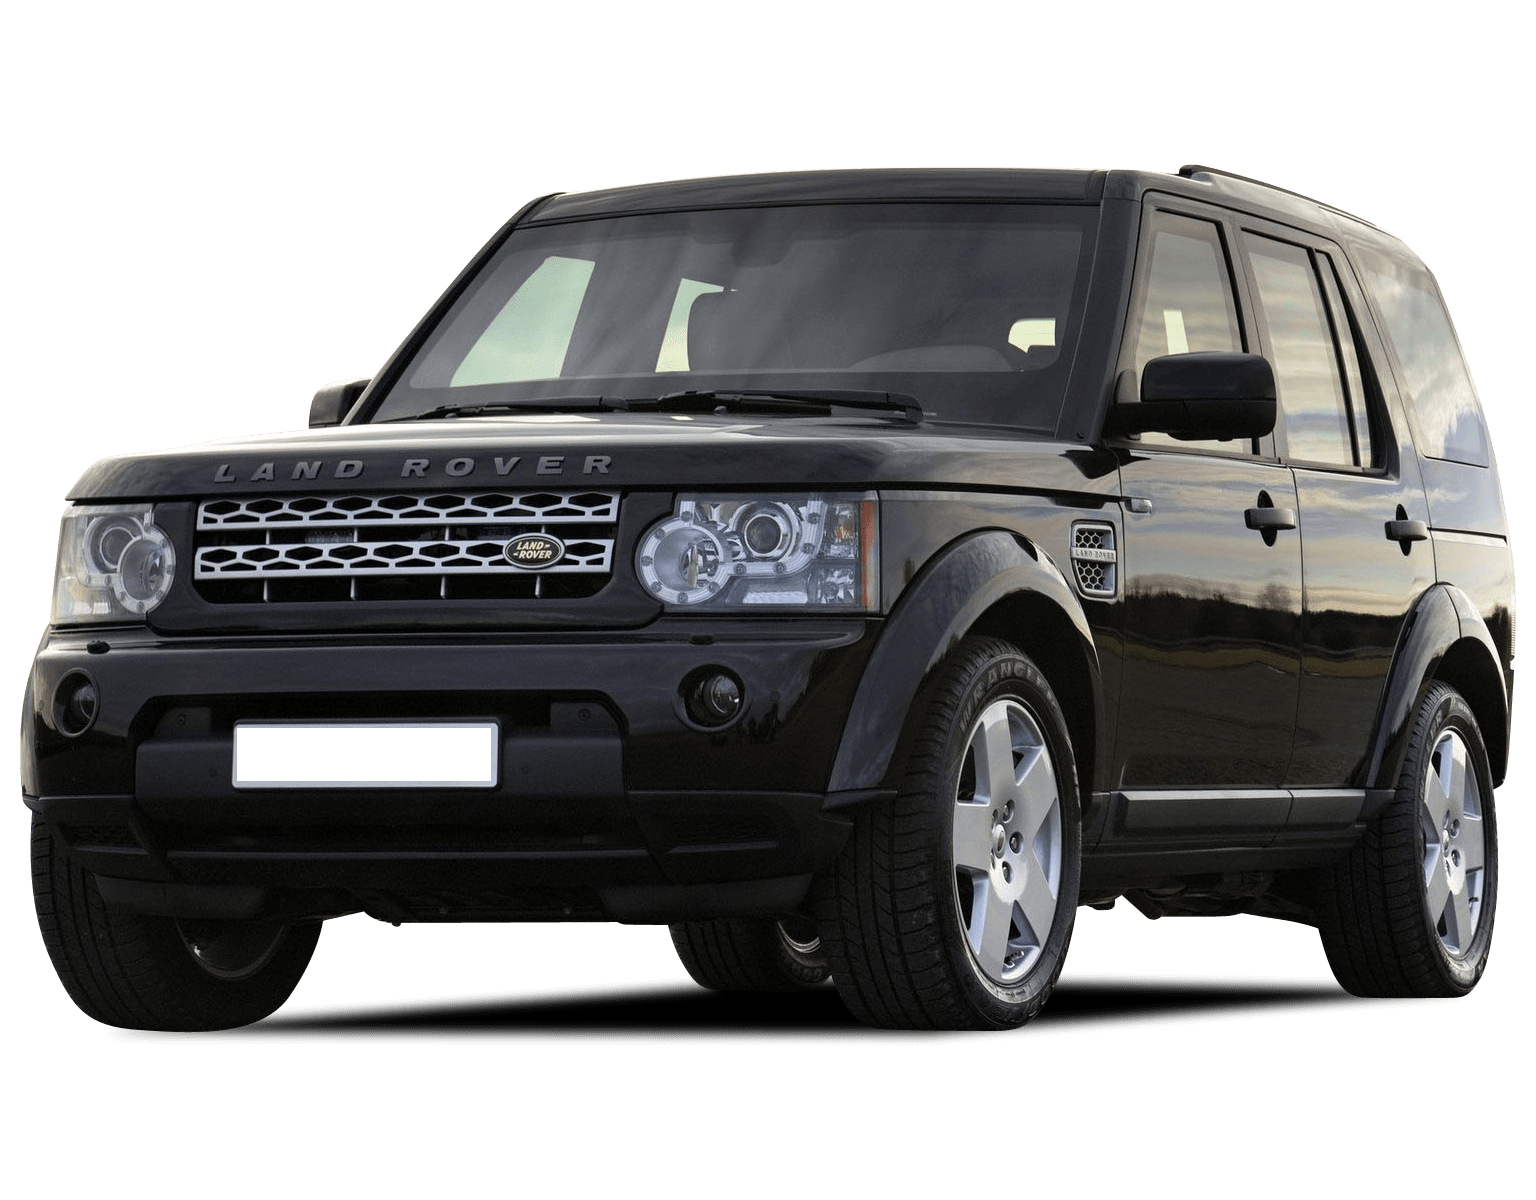 Altaar congestie patrouille Land Rover Discovery 4 Review, For Sale, Specs, Models & News in Australia  | CarsGuide